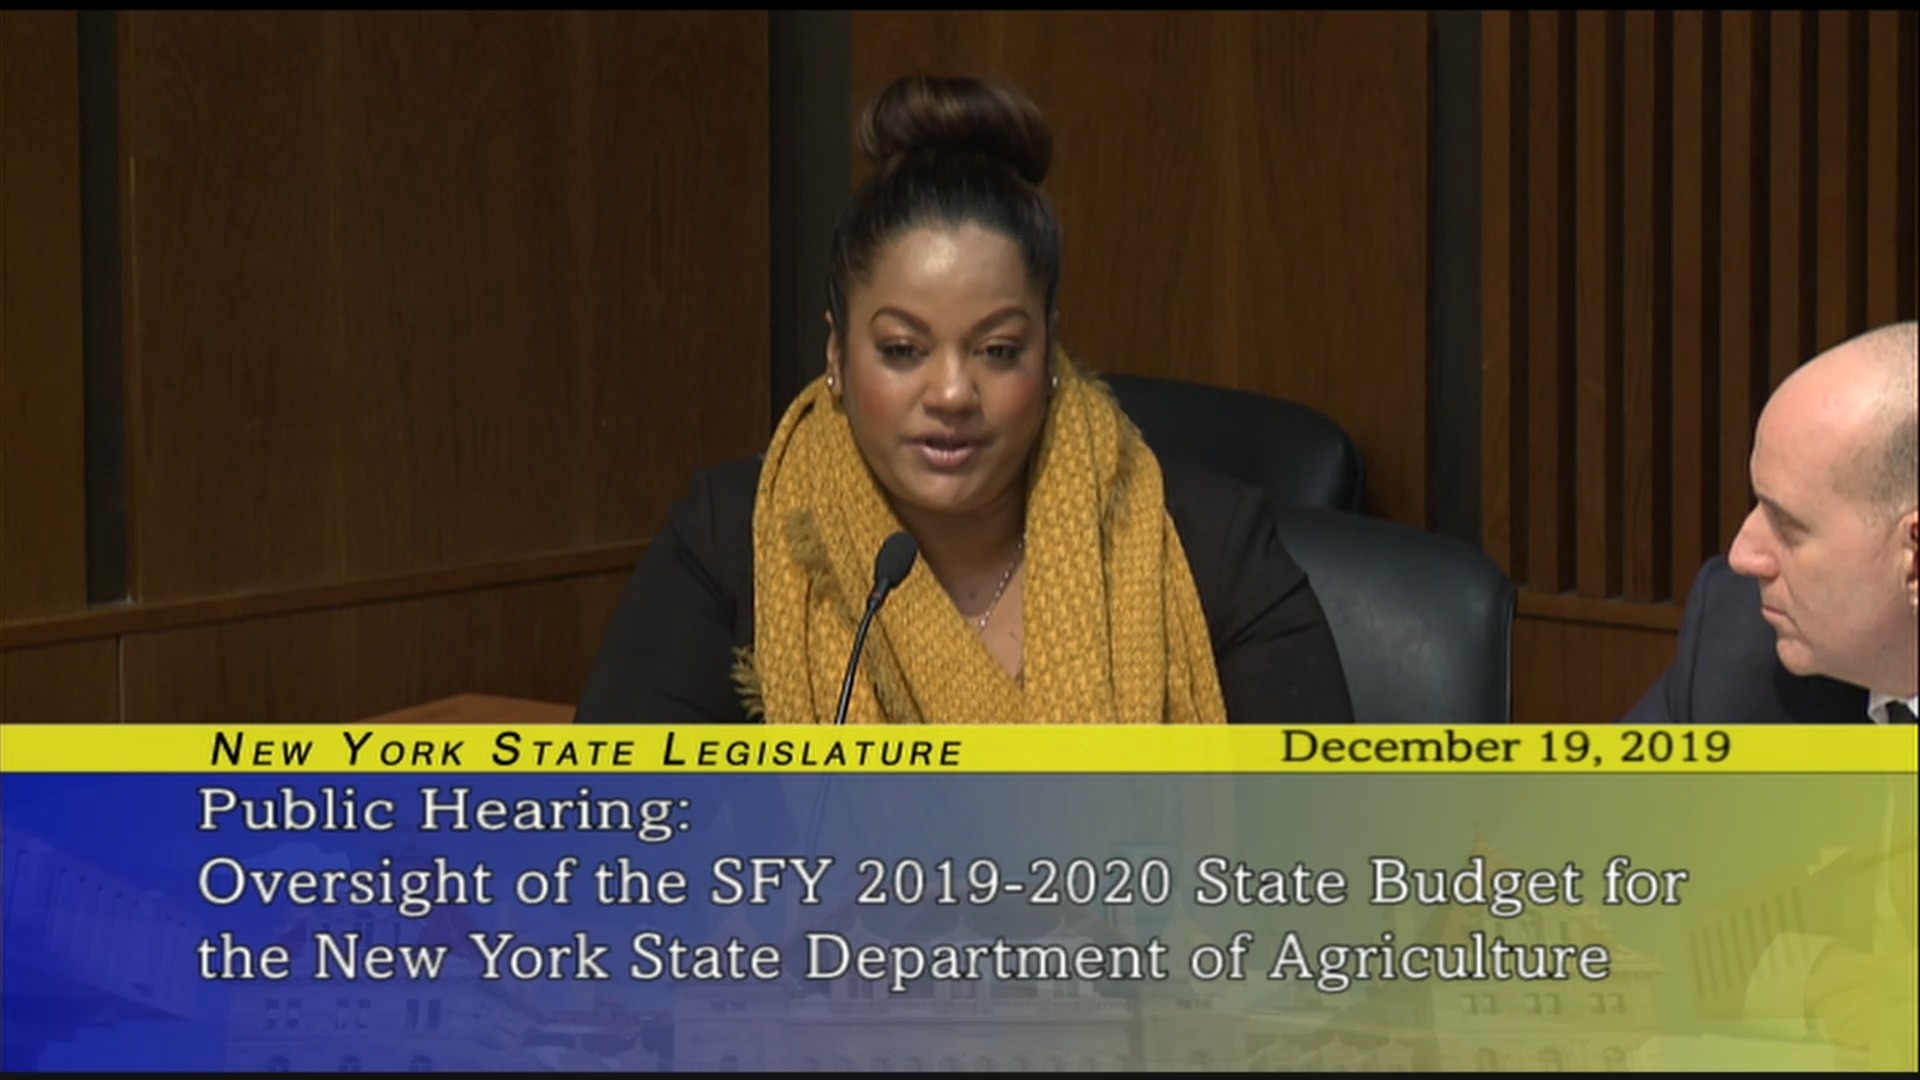 Public Hearing On New York State Department of Agriculture and Markets 2019-2020 State Budget (1)